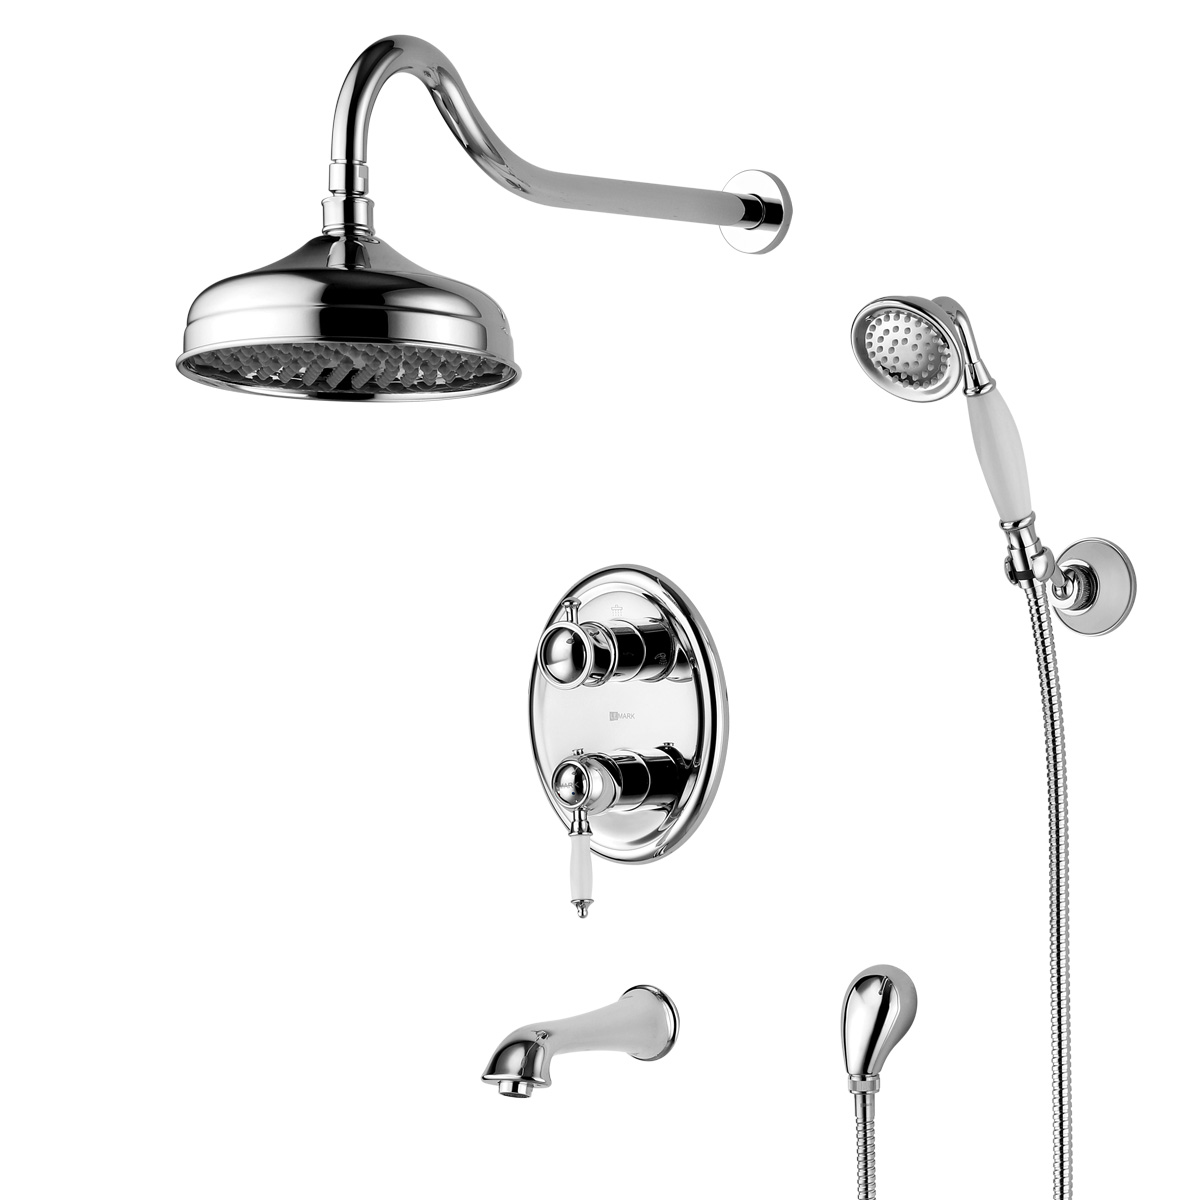 LM4822C Built-in bath and shower faucet